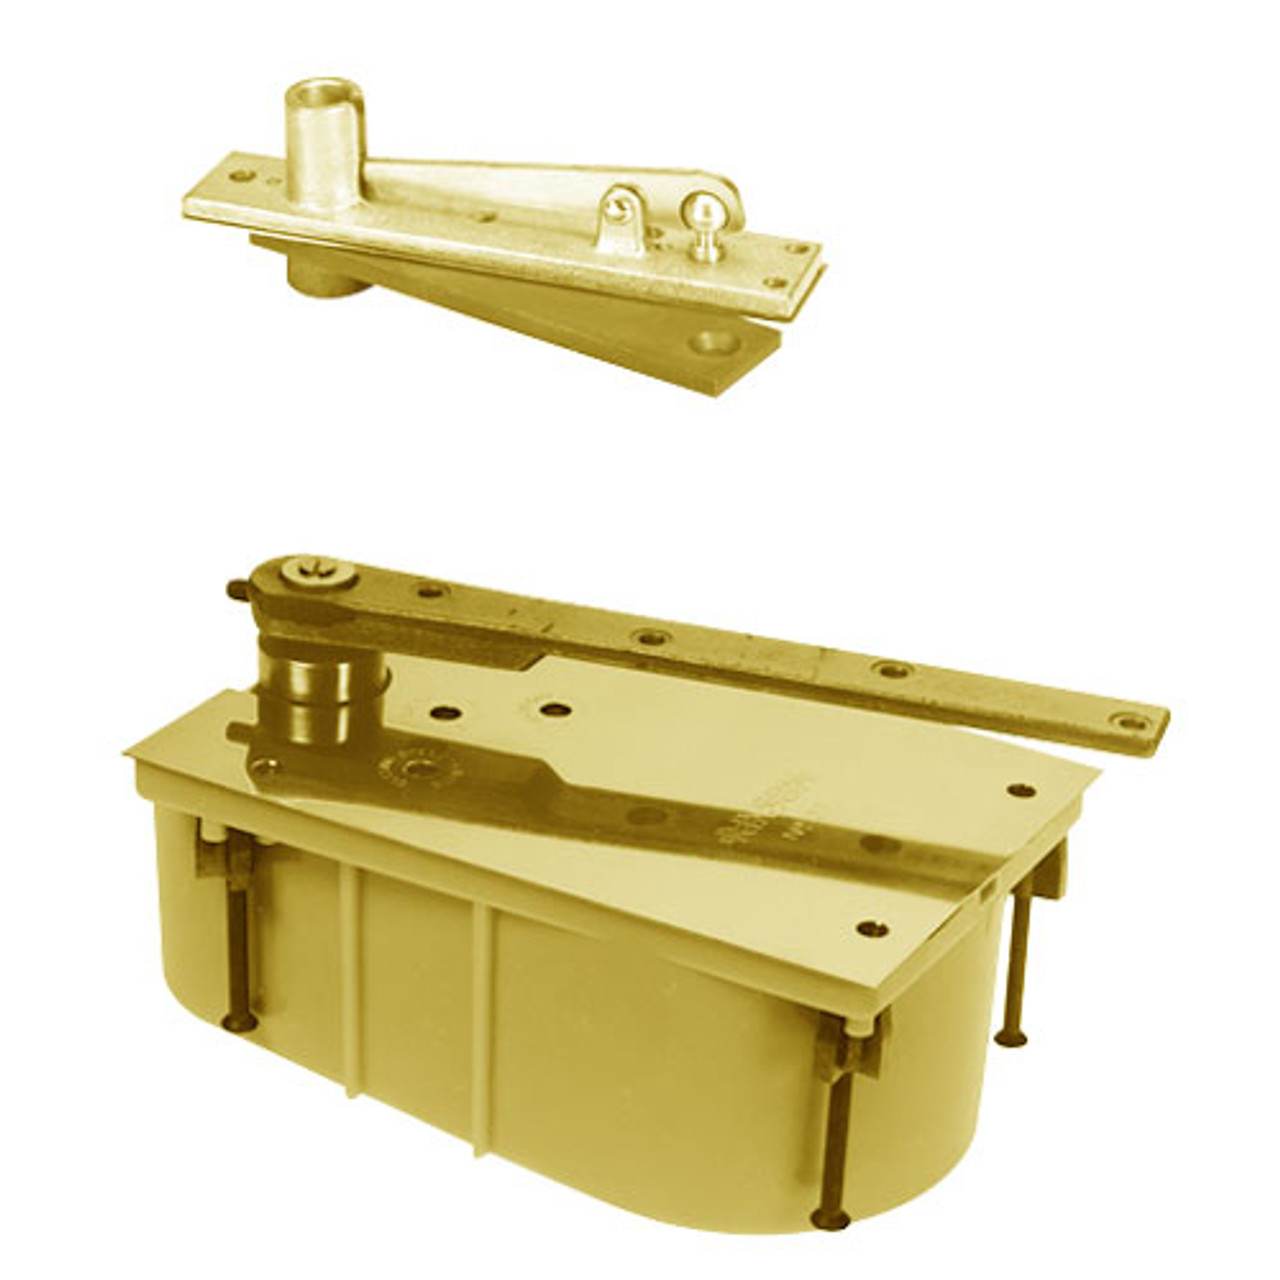 28-105N-554-LFP-RH-605 Rixson 28 Series Heavy Duty Single Acting Center Hung Floor Closer with Concealed Arm in Bright Brass Finish